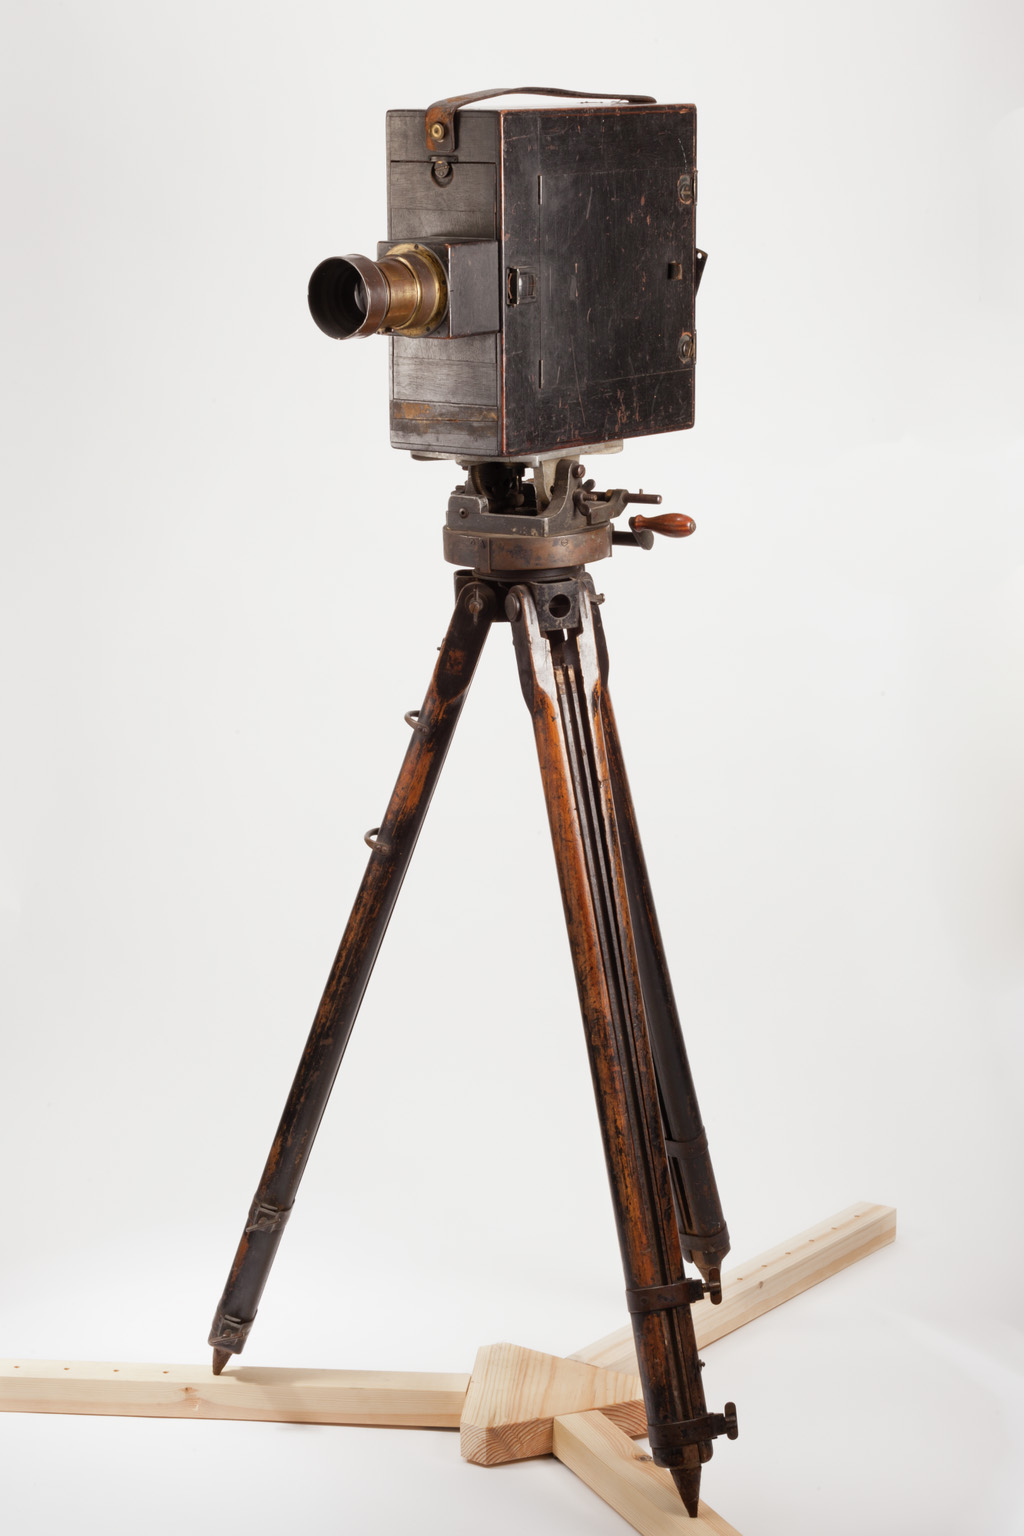 35mm hand cranked motion picture camera owned and used by natural history photographer and cinematographer Cherry Kearton, manufactured by Urban Trading Co., early 20th century